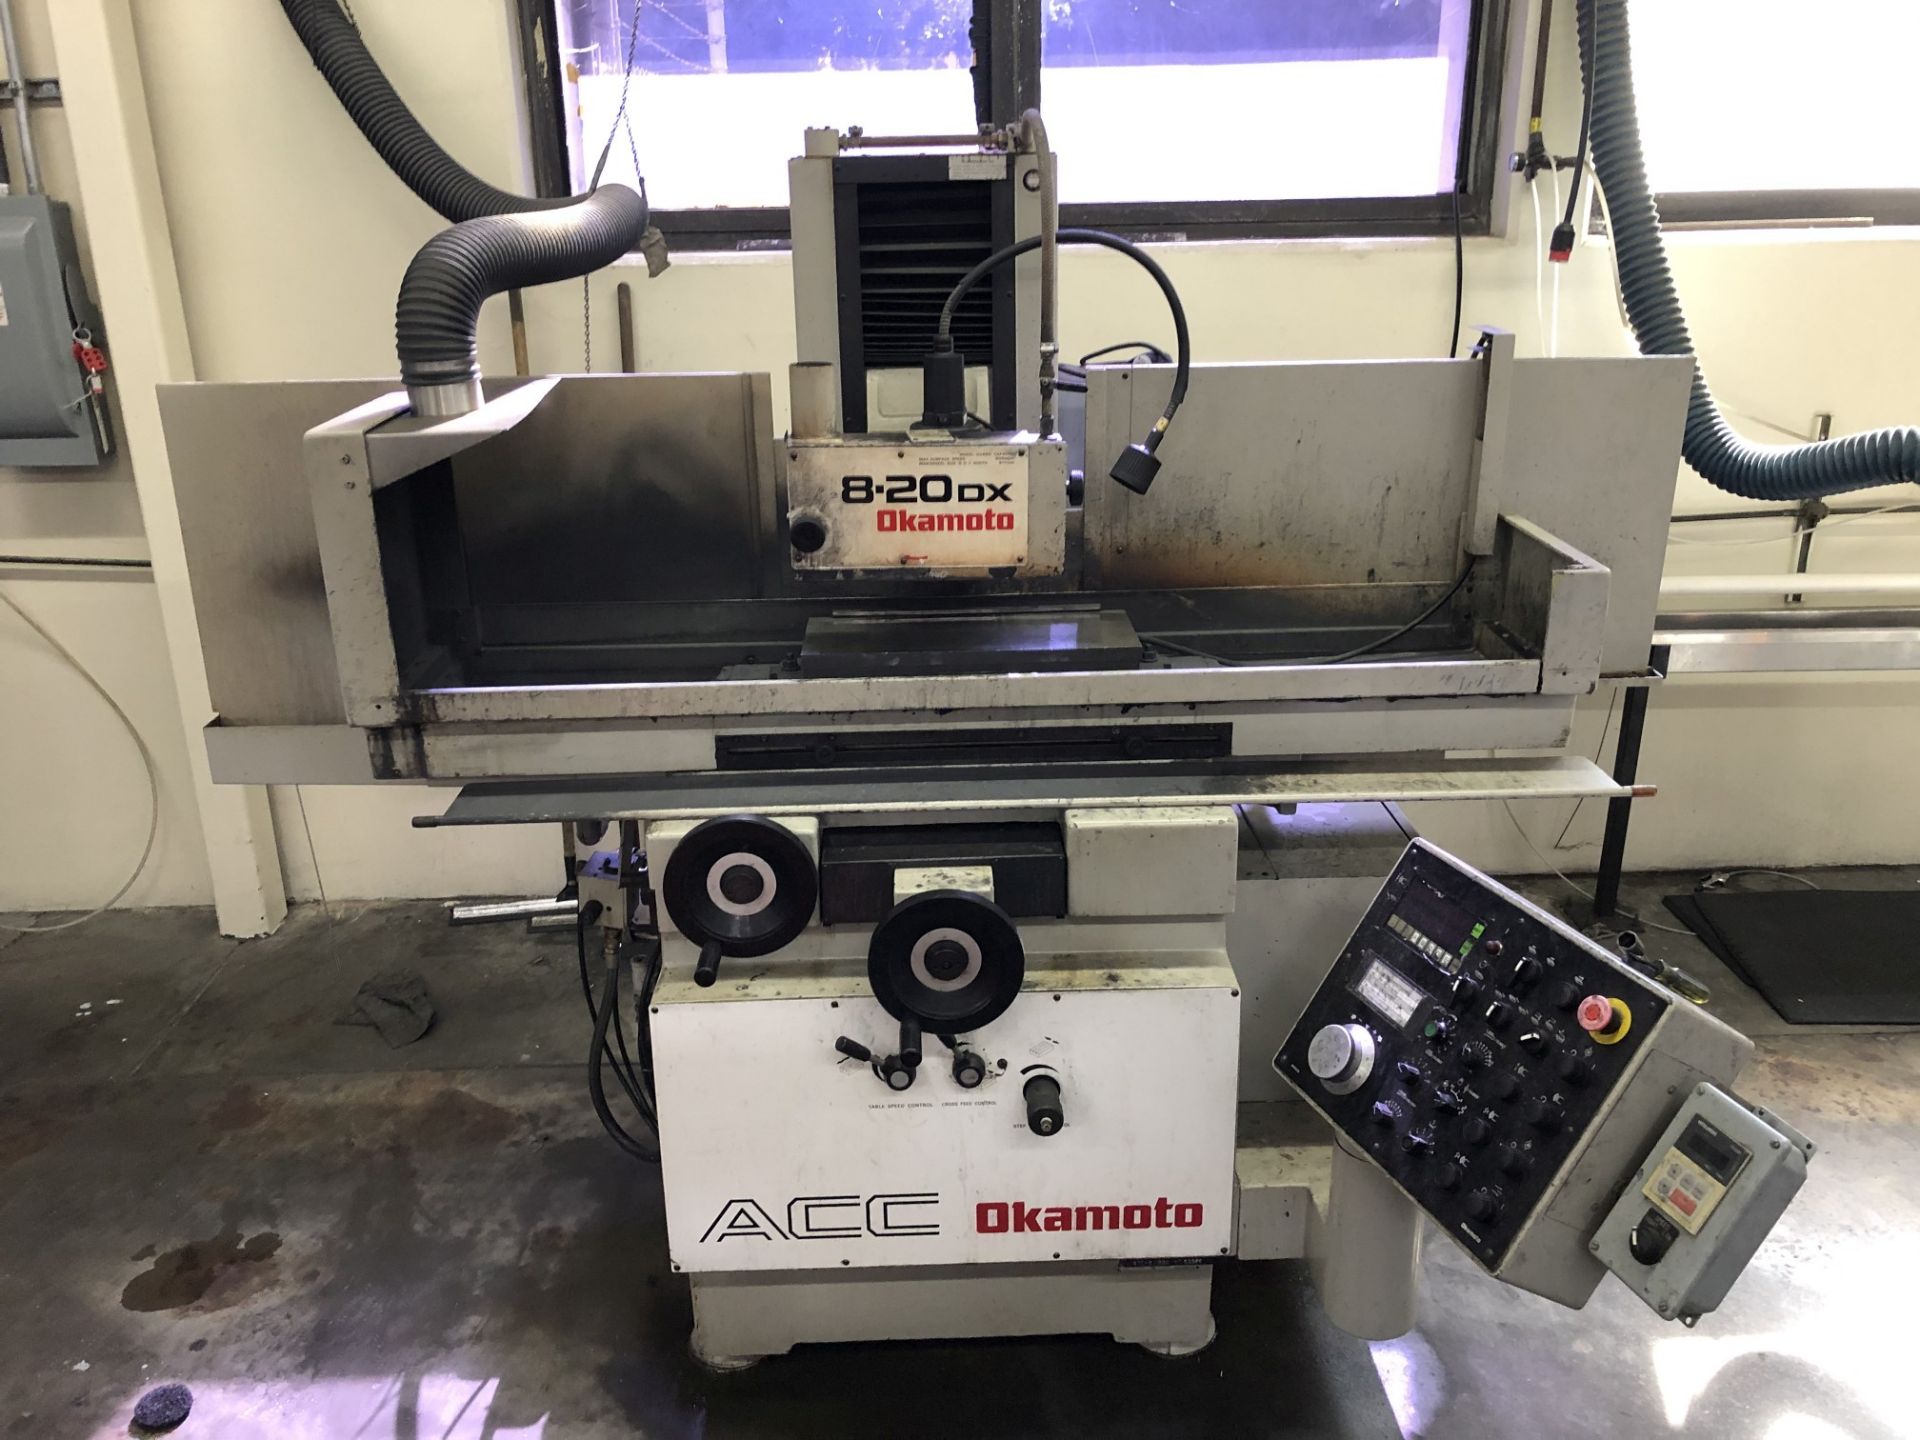 Okamoto ACC-8-20DX Surface Grinder, 8" x 20" Electro Magnetic Chuck, S/N 62586 (SPT #213)